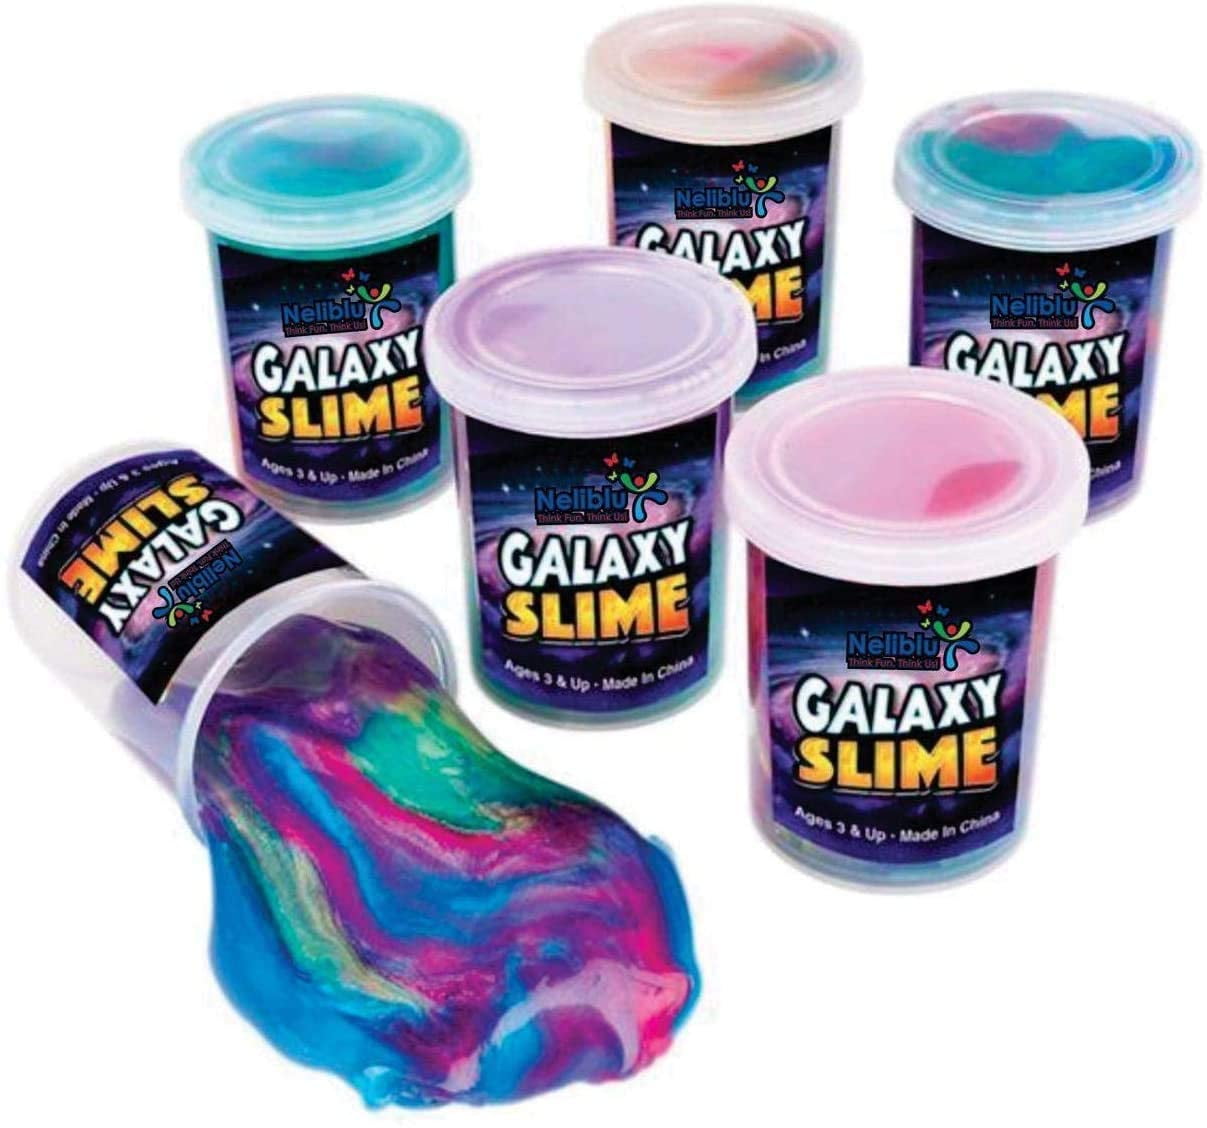 SPARKLY GLITTER GOO ALIEN SPACE SLIME PUTTY KIDS BOYS GIFT XMAS PARTY BAG FILLER 